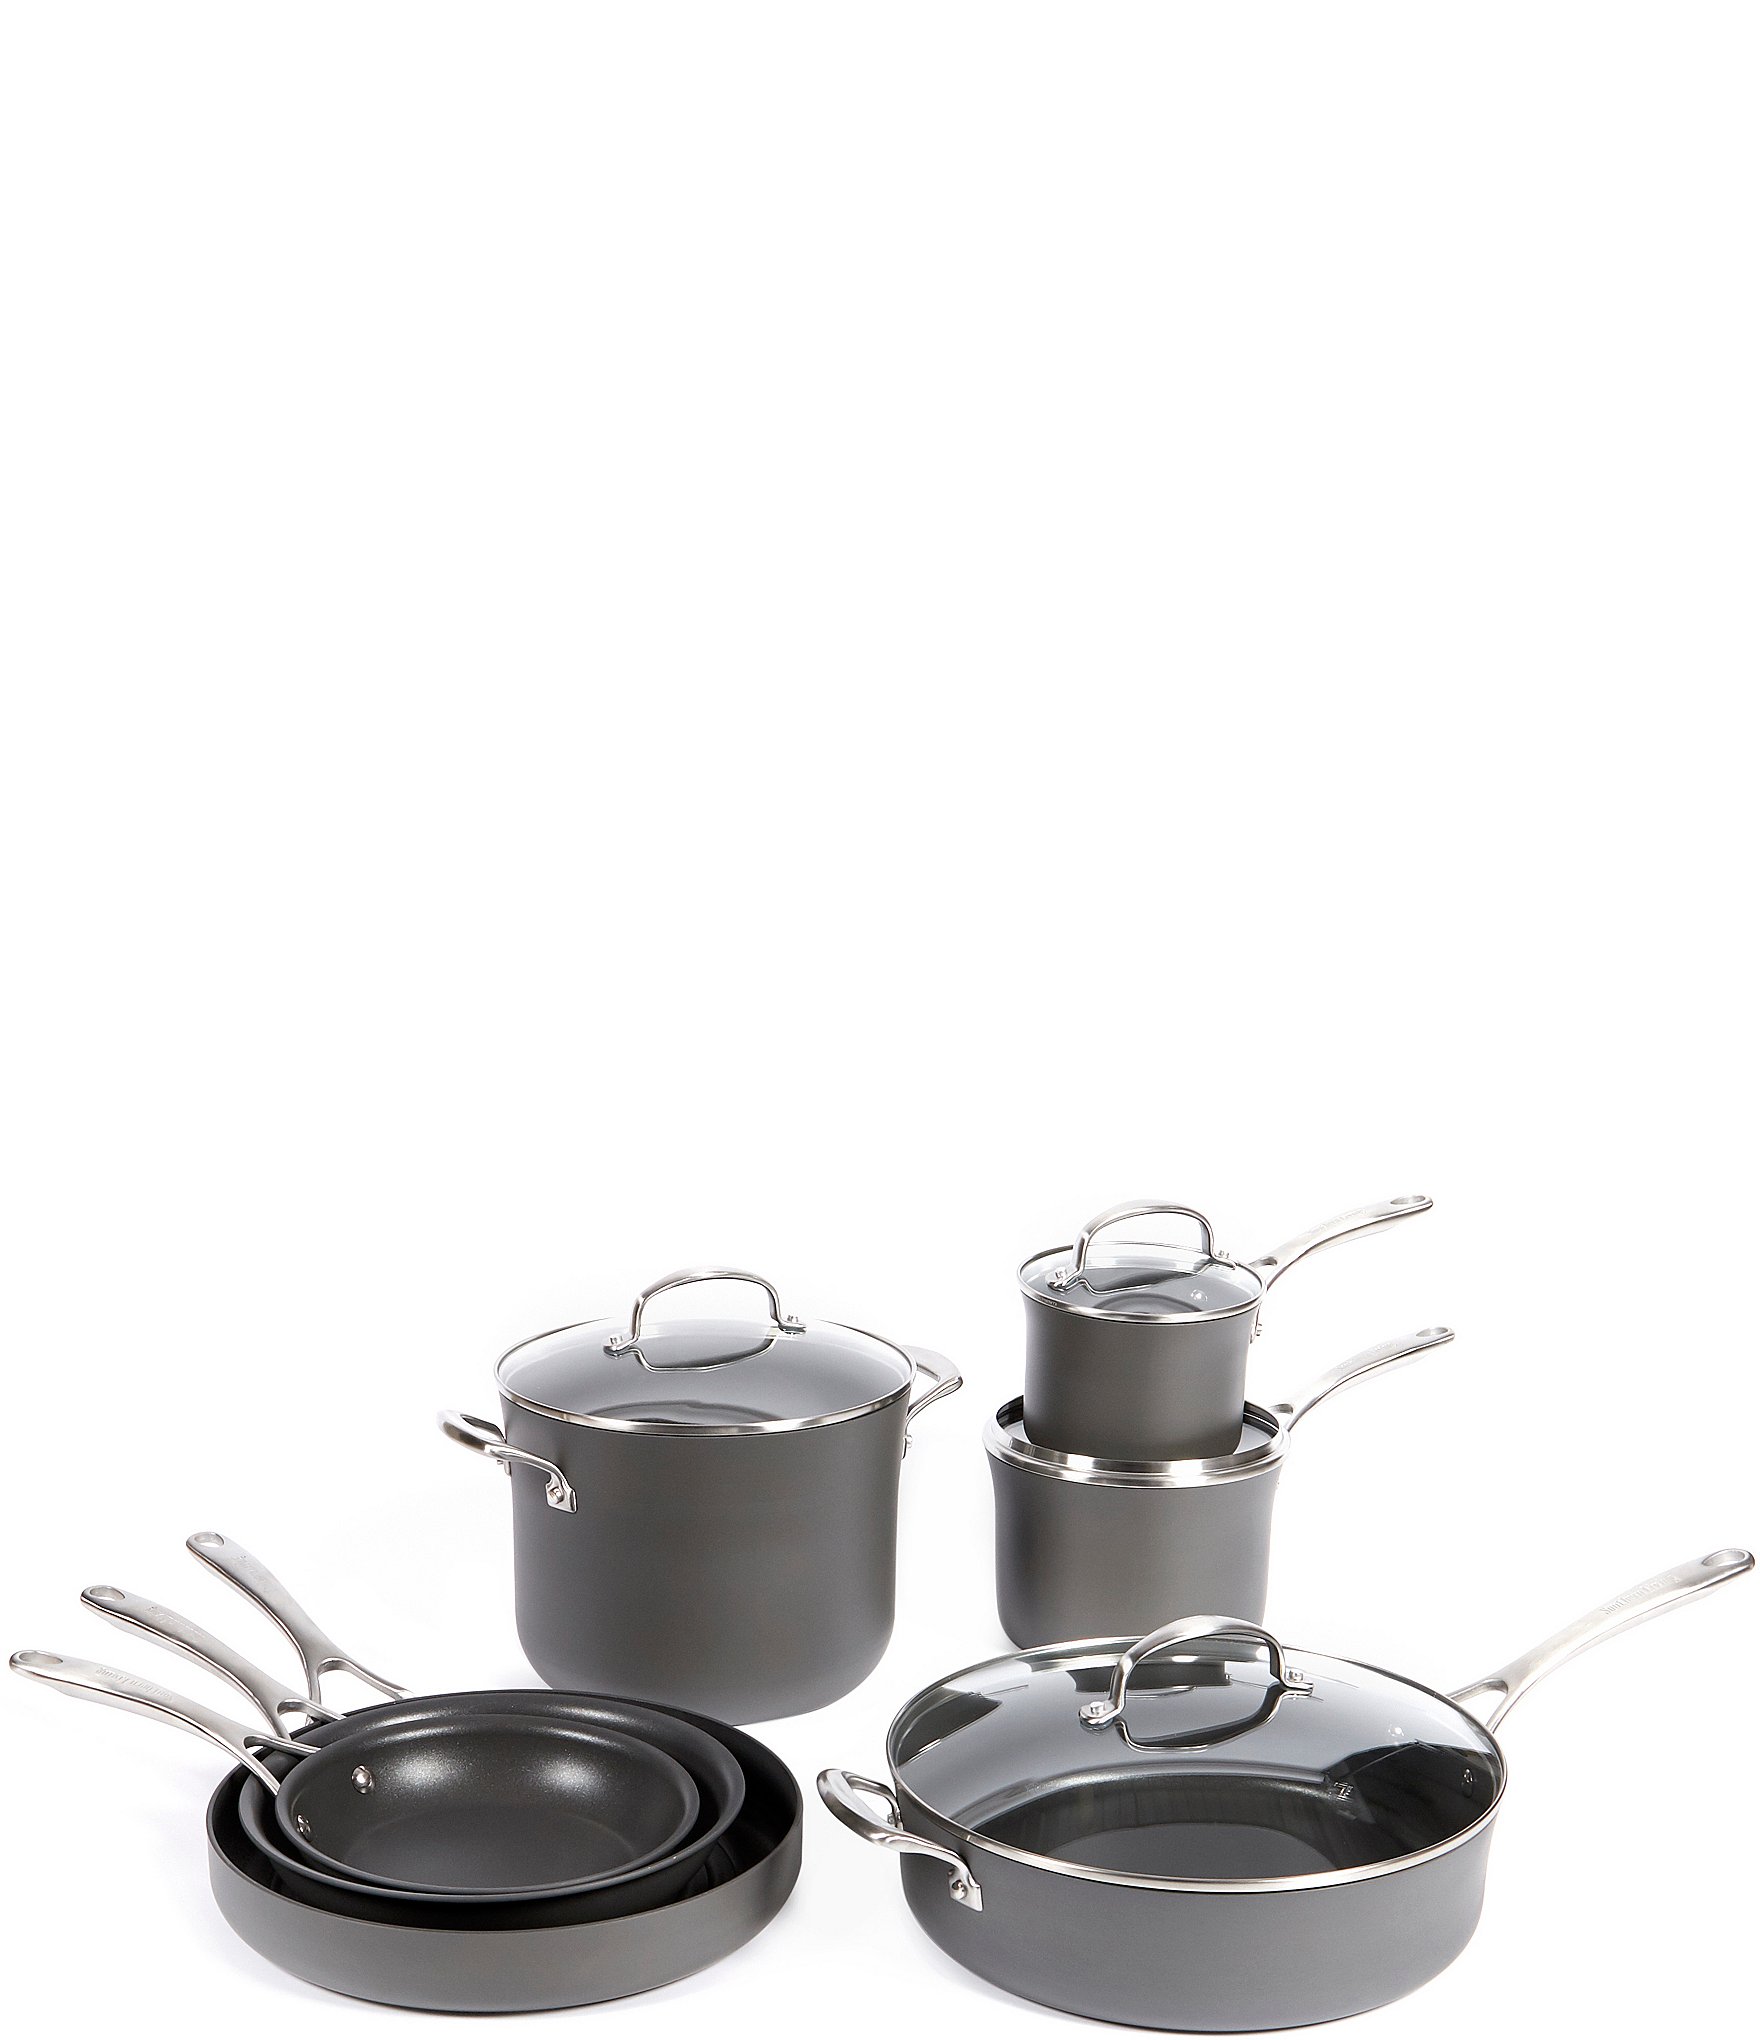 Country Kitchen Pots and Pans Set Nonstick, 11 Piece Cookware Sets, Brown